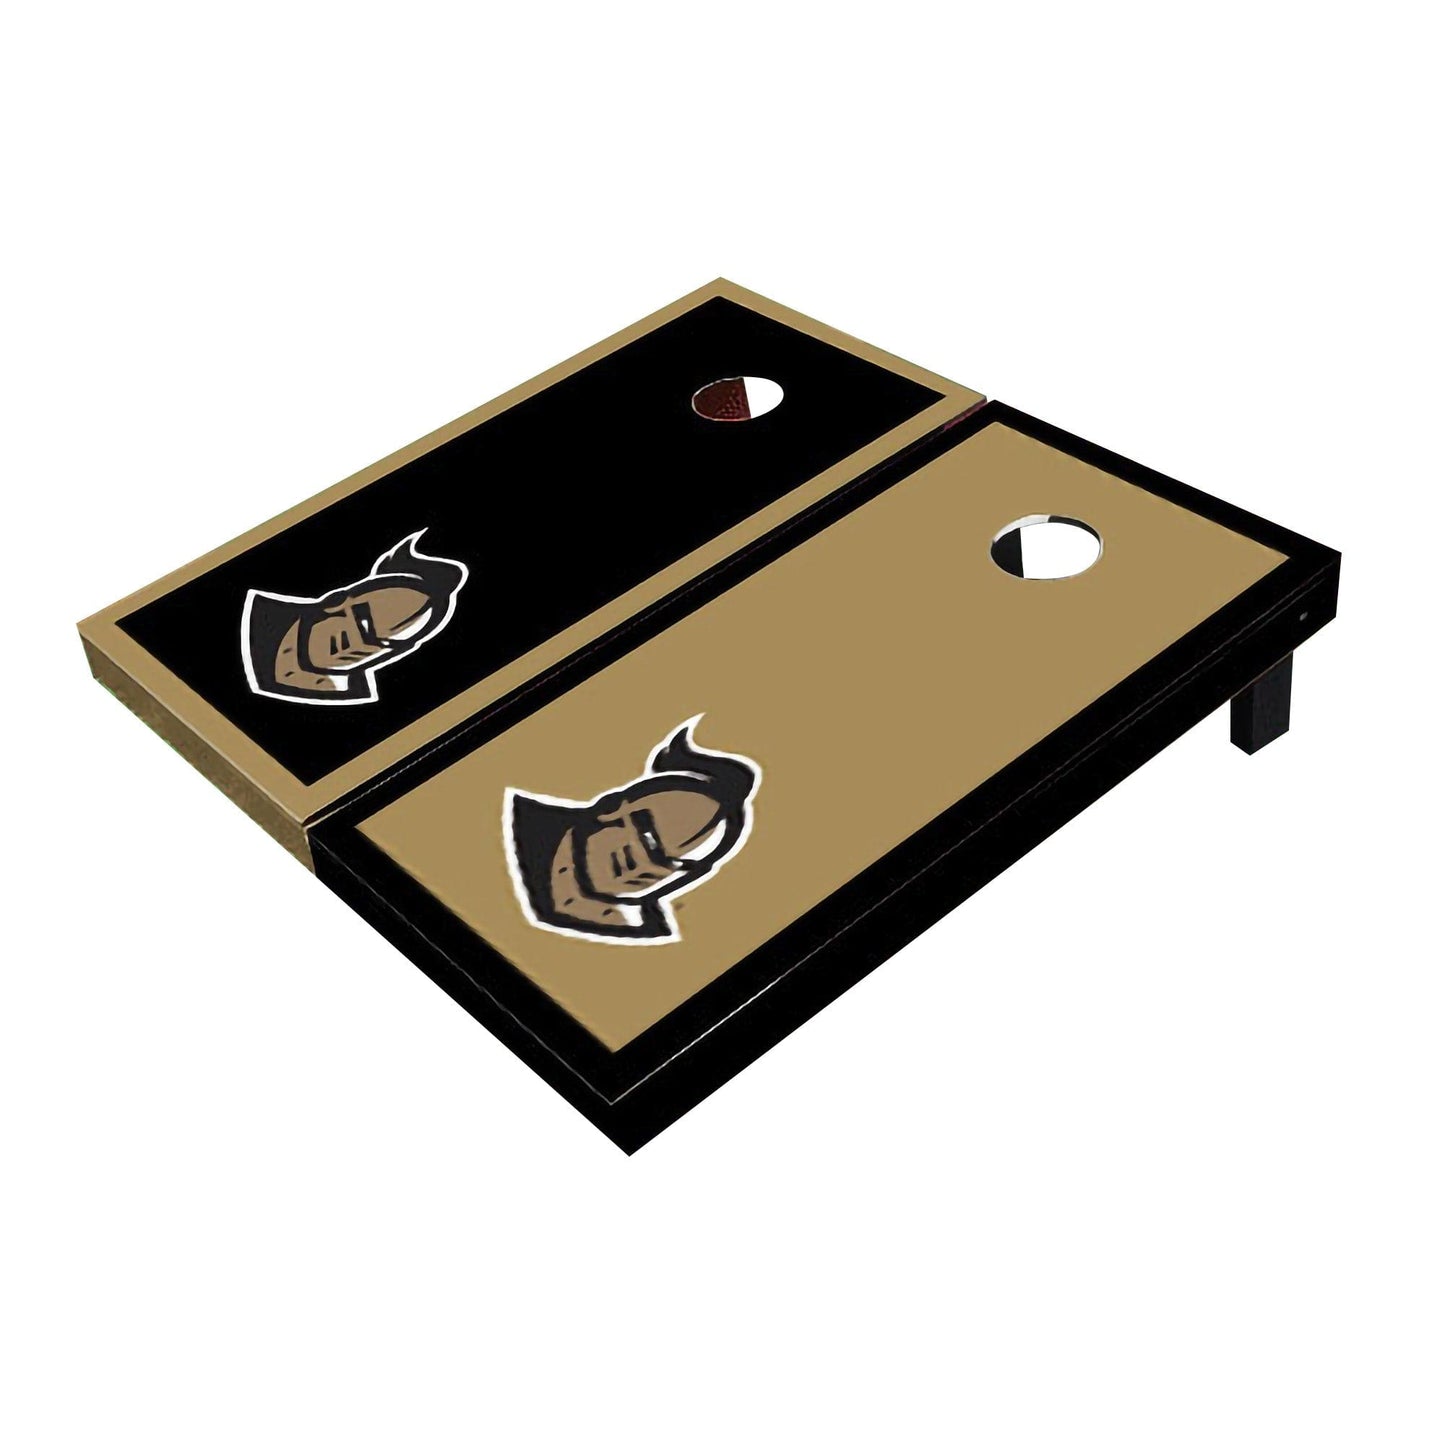 Central Florida UCF Golden Knights "Knightro" Gold And Black Alternating Borders Cornhole Boards